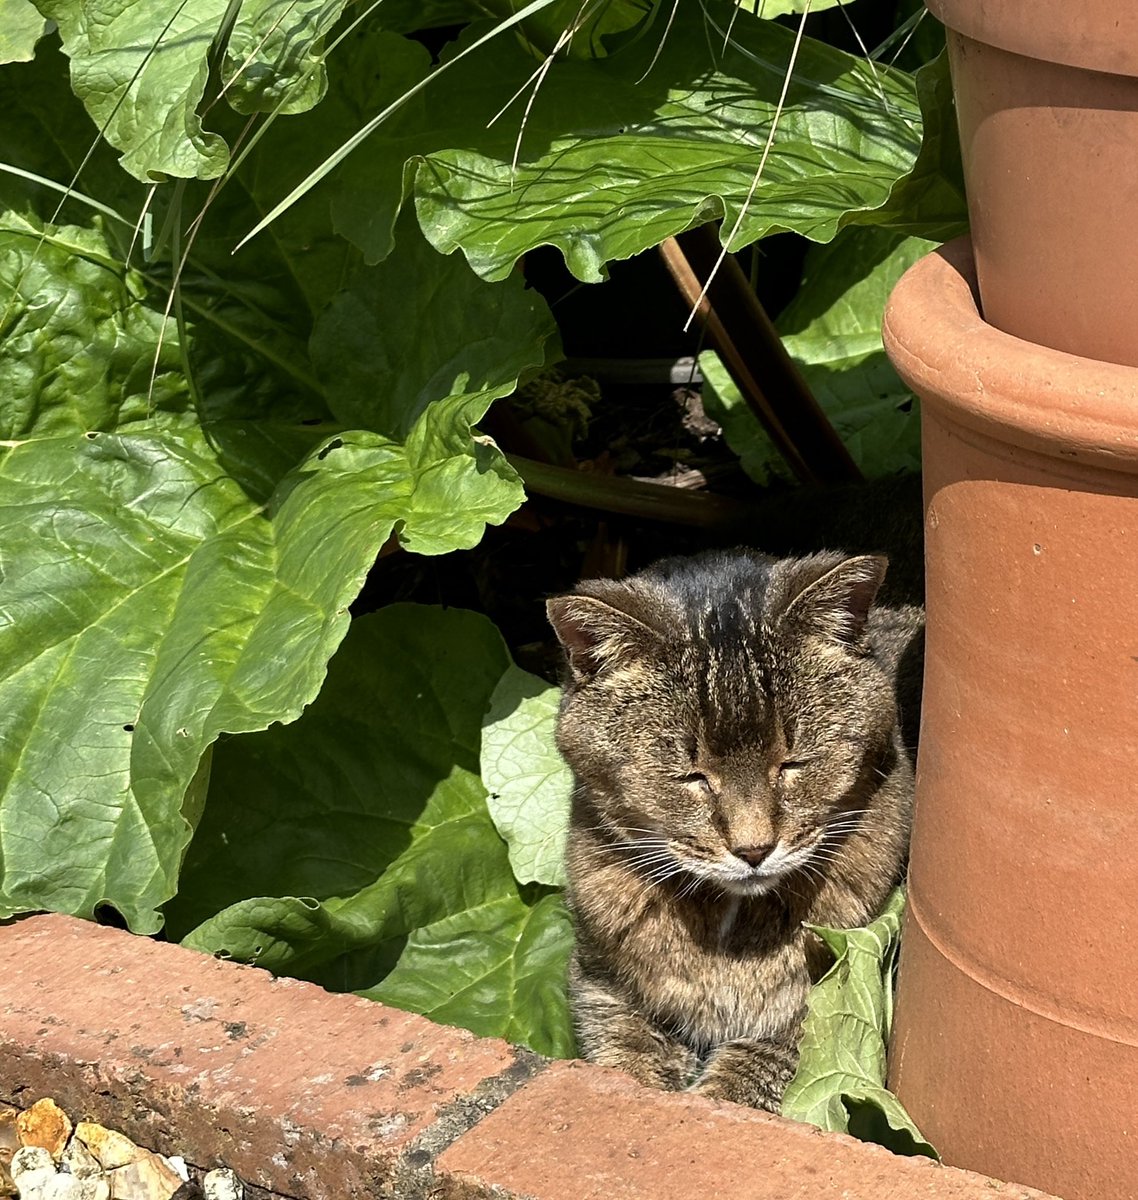 “I can see you, sleeping underneath the rhubarb” 😺🌿 “Well I am 17, I need an afternoon nap” 💤 #caturday #catsoftwitter #catsofx #cats